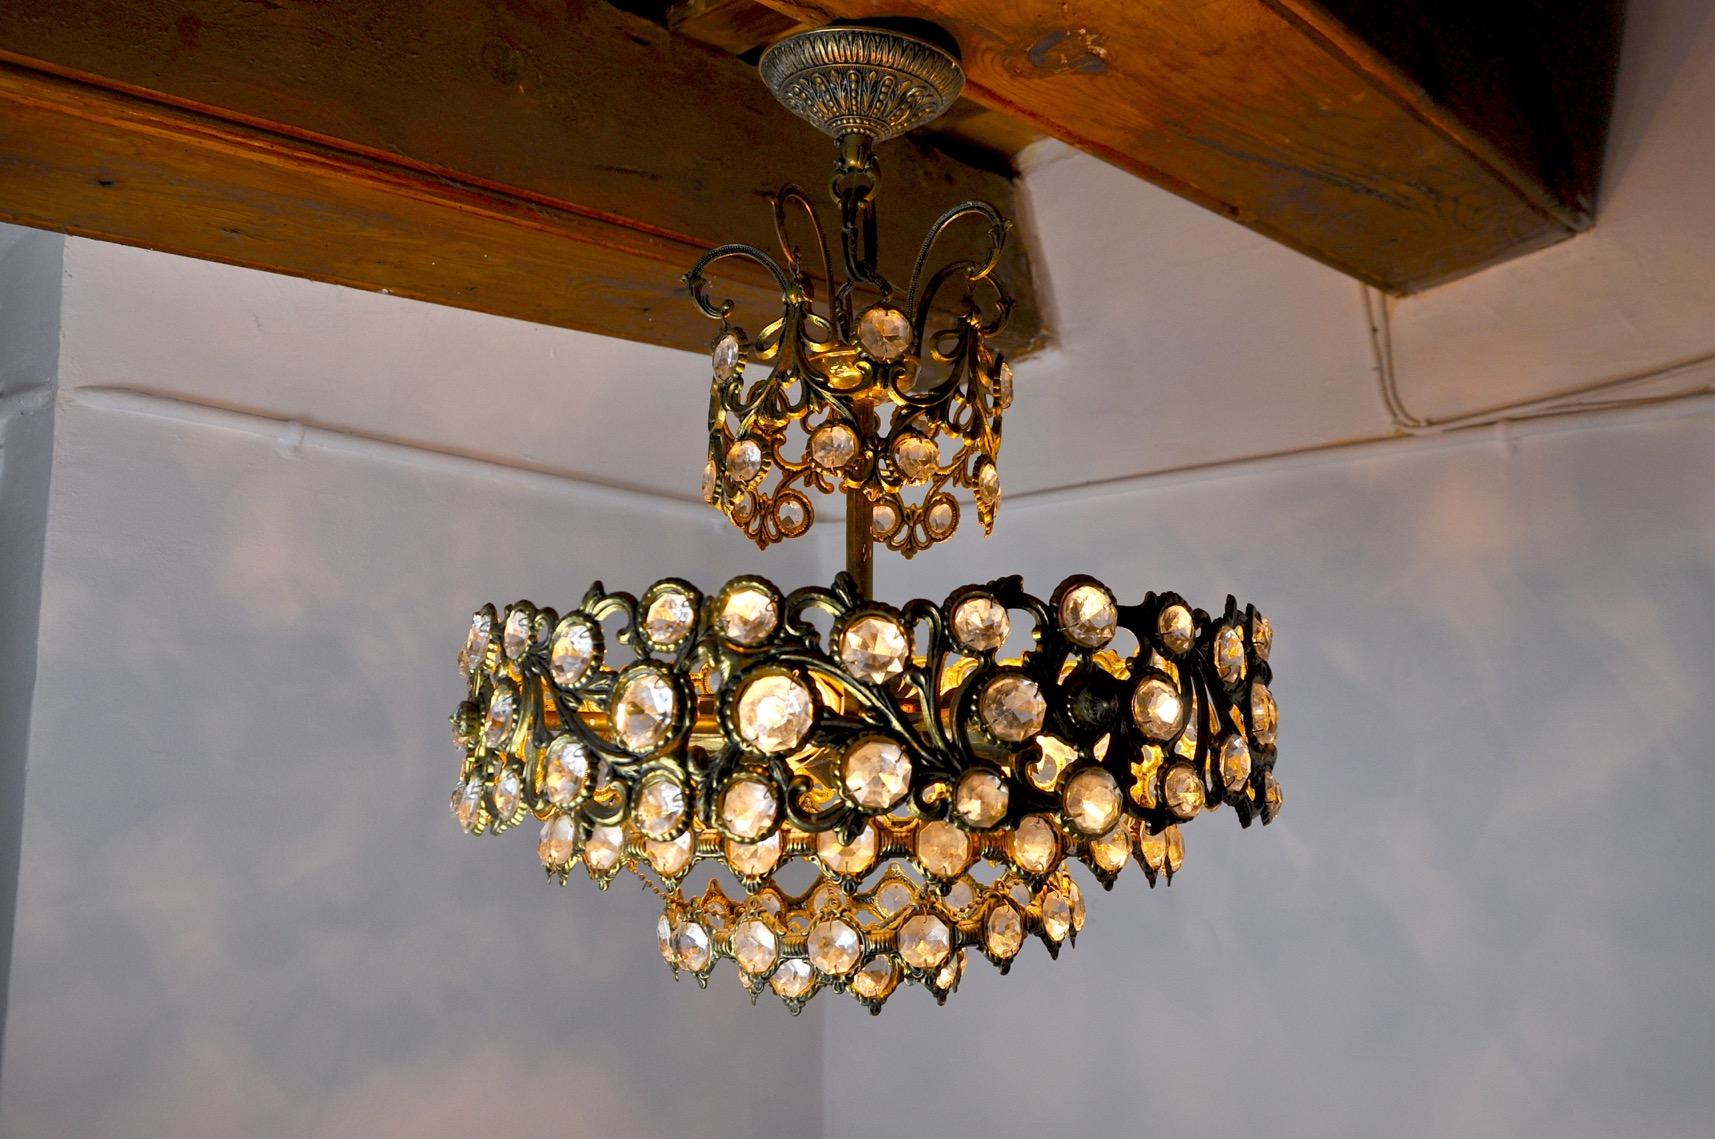 Rare and large palwa chandelier designated by ernest palm and produced in the 60s in barcelona. Golden structure composed of cut crystals in perfect condition. Rare design object that will illuminate your interior wonderfully. Electricity checked,